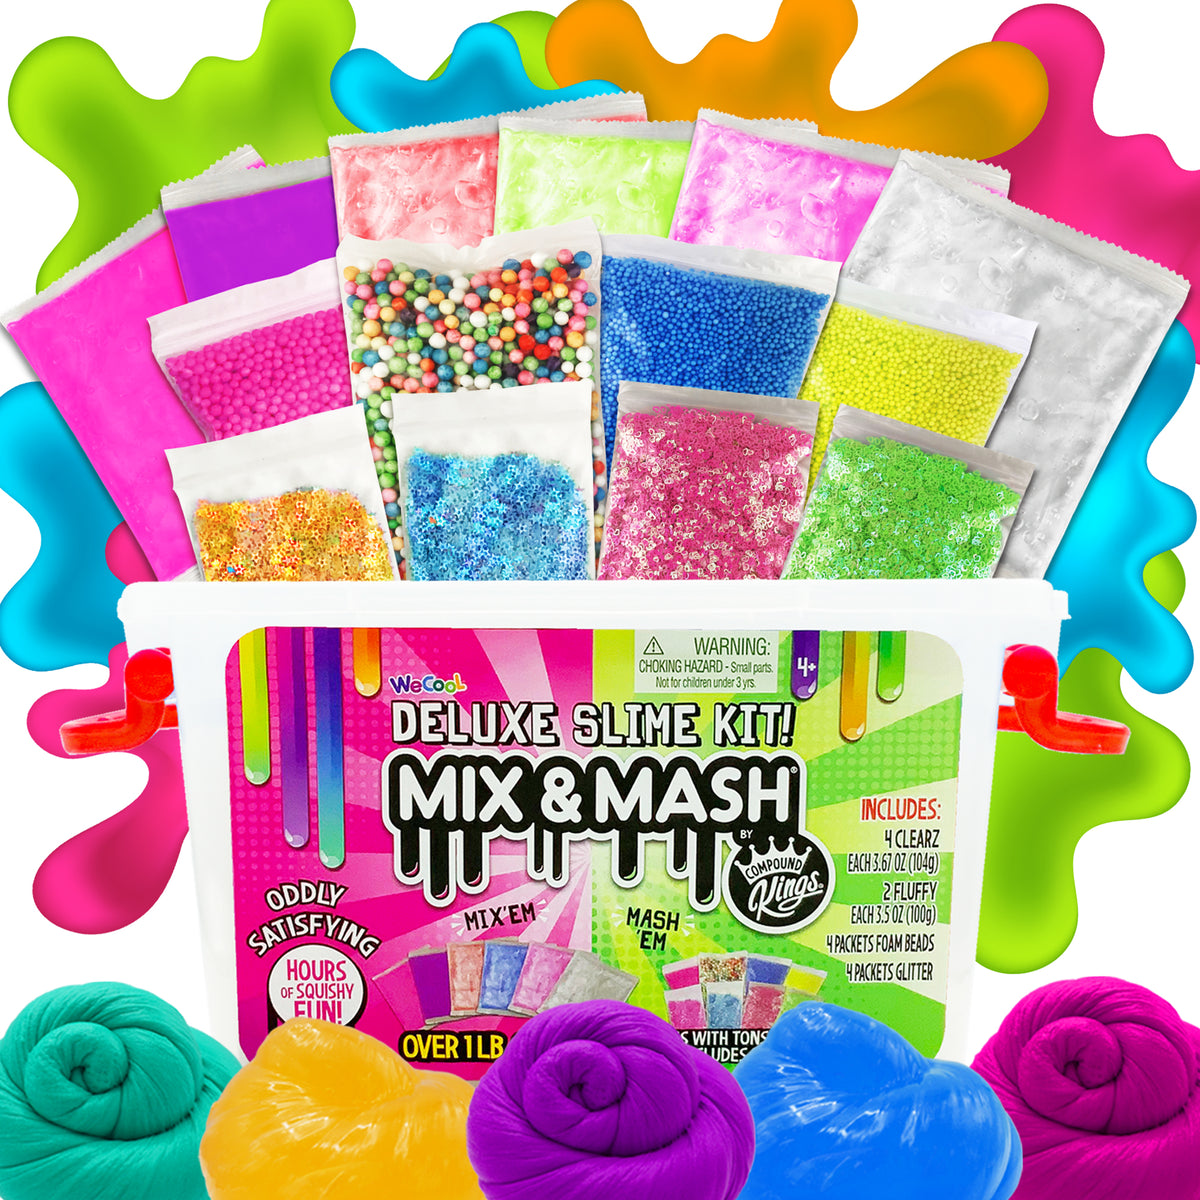 Mix-ins Slime Assorted – Awesome Toys Gifts